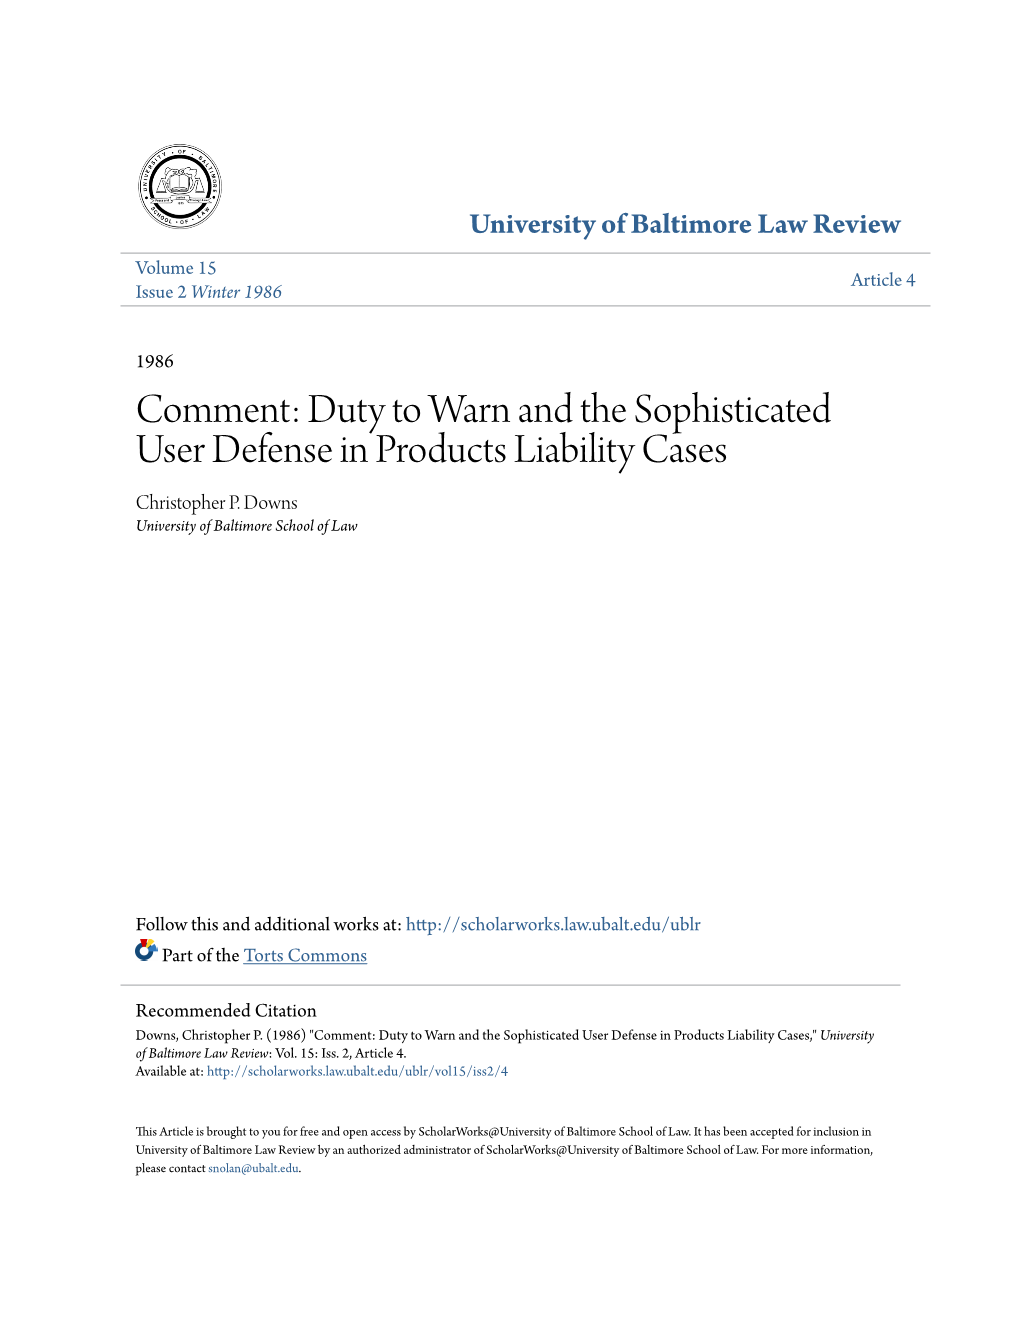 Duty to Warn and the Sophisticated User Defense in Products Liability Cases Christopher P